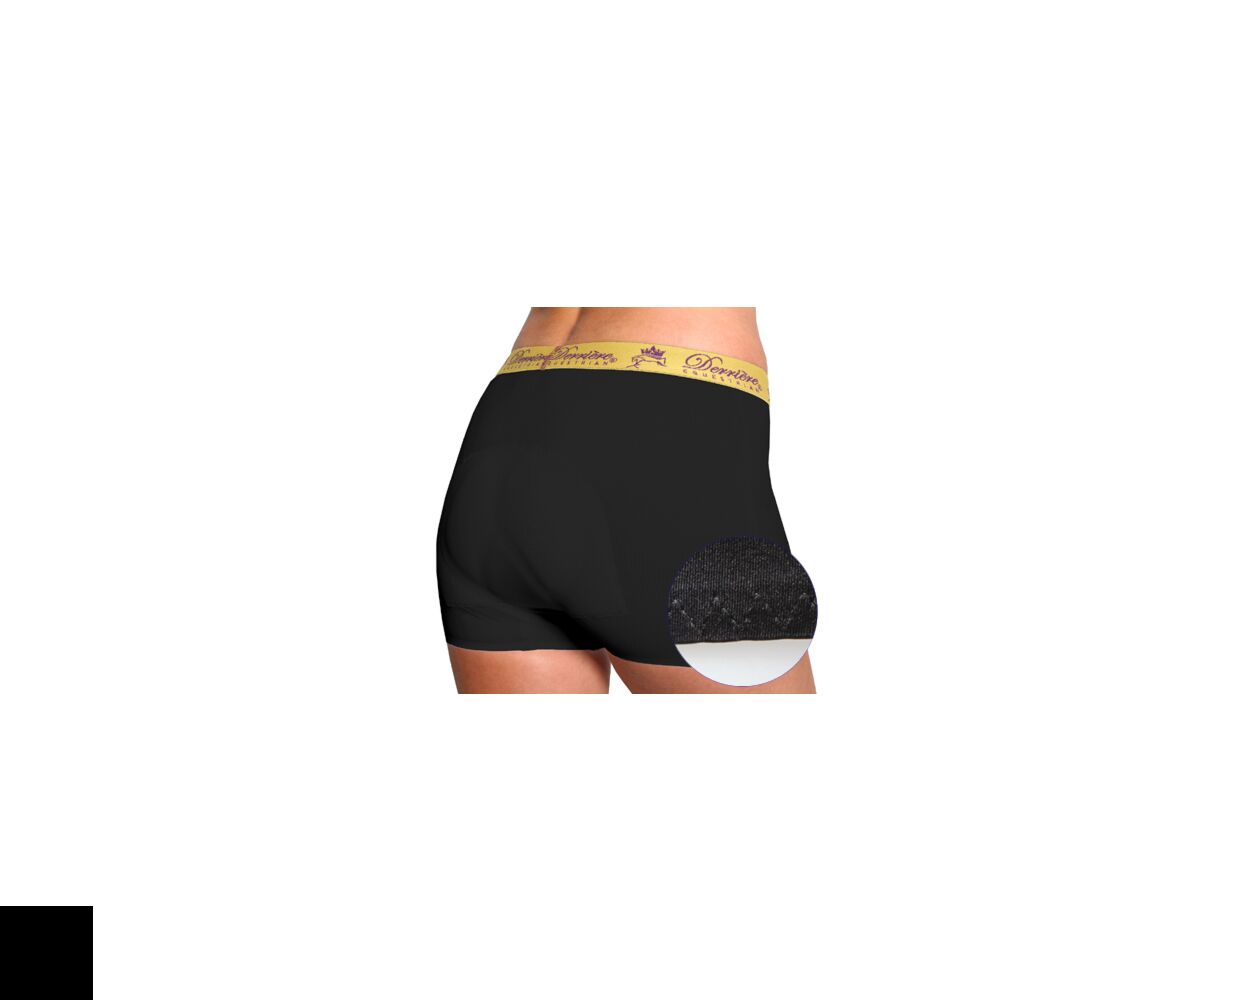 Derriere - Performance Panty Padded Shorty Female